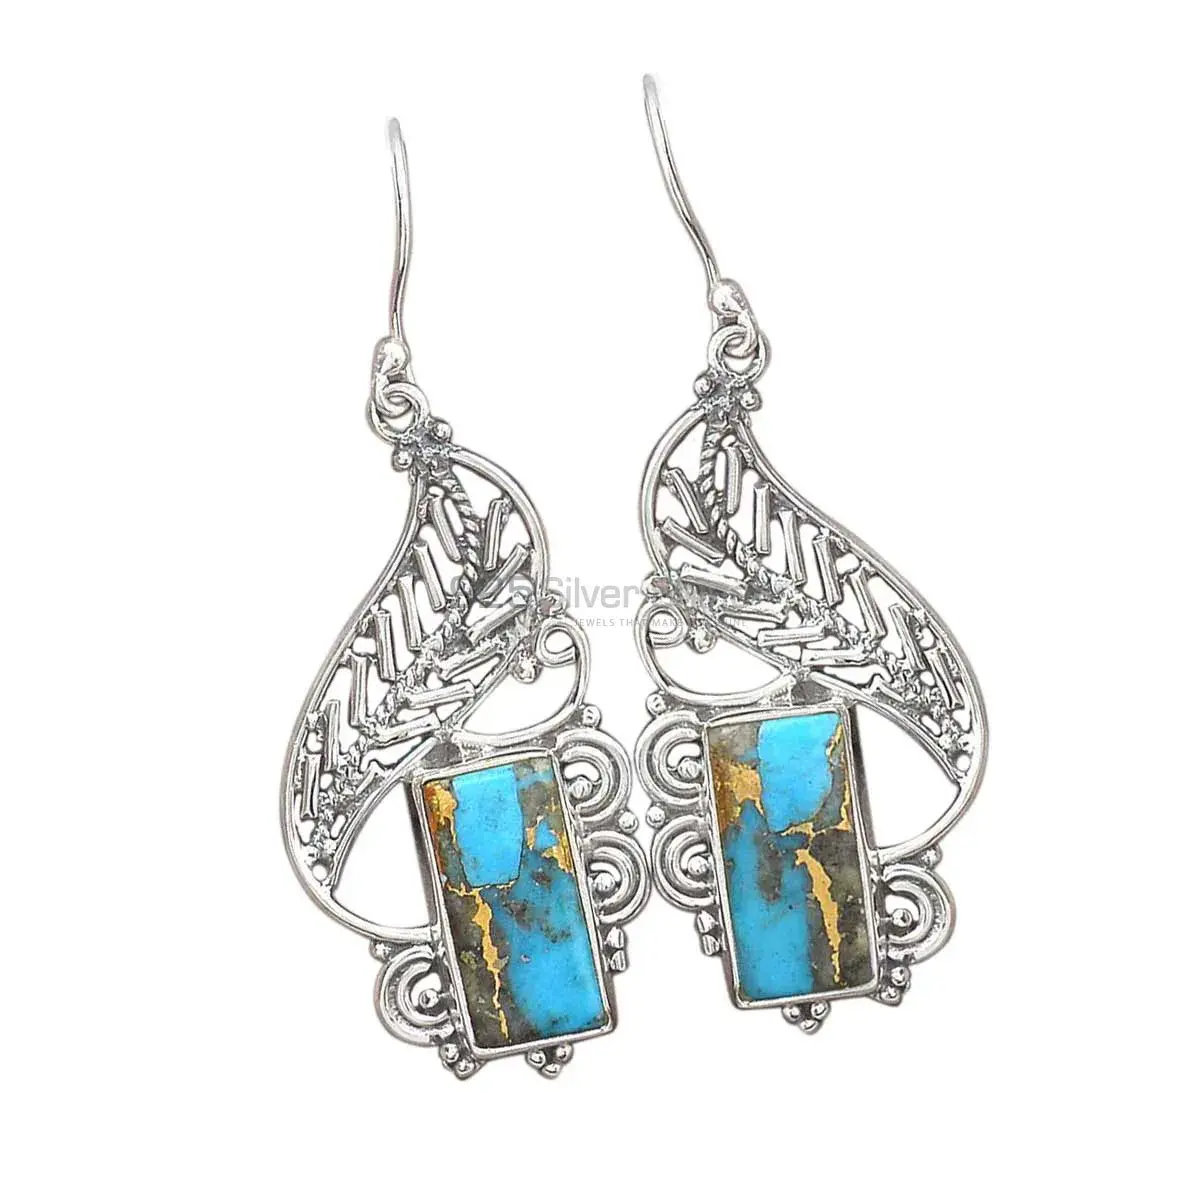 Unique 925 Sterling Silver Handmade Earrings Exporters In Turquoise Gemstone Jewelry 925SE2960